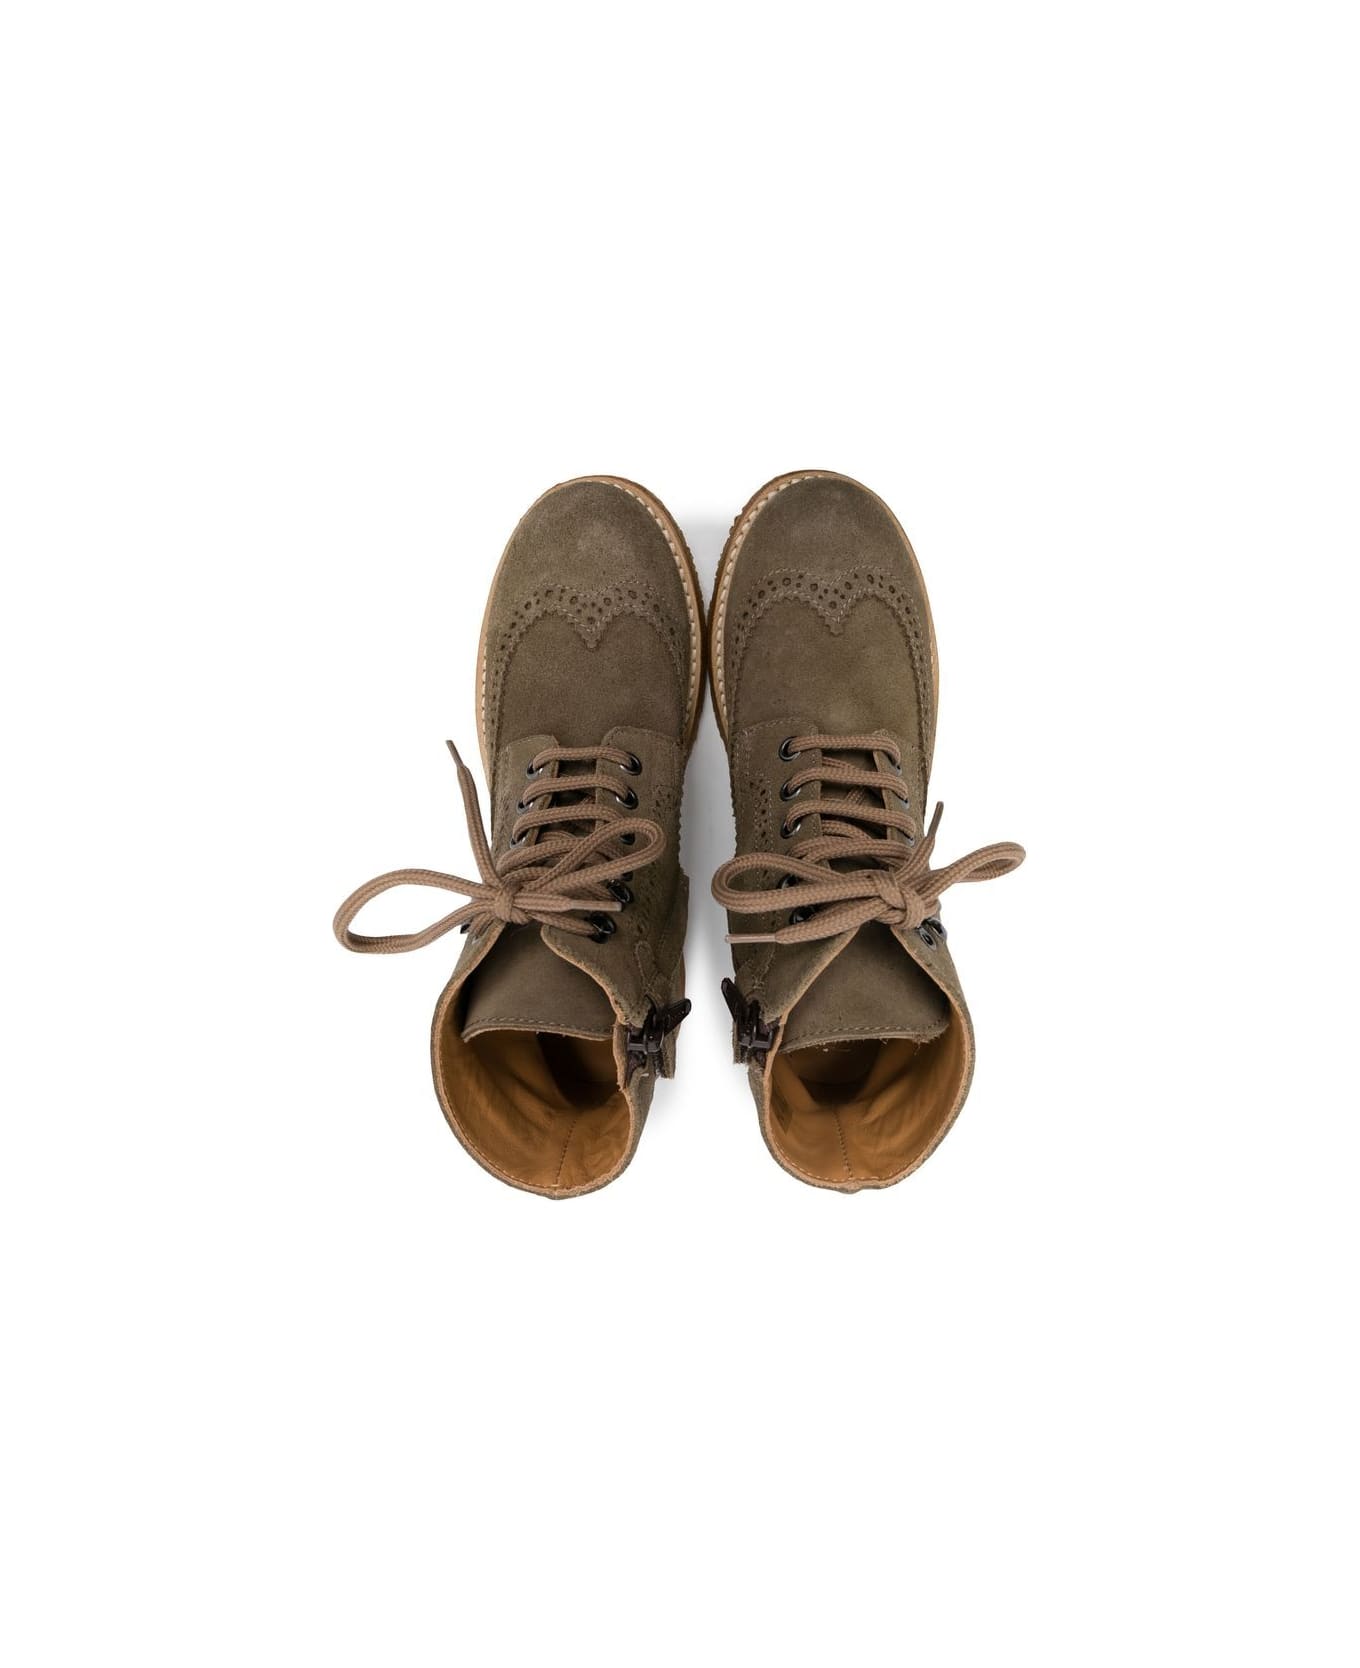 Gallucci Lace-up Suede Brogue Boots - Beige